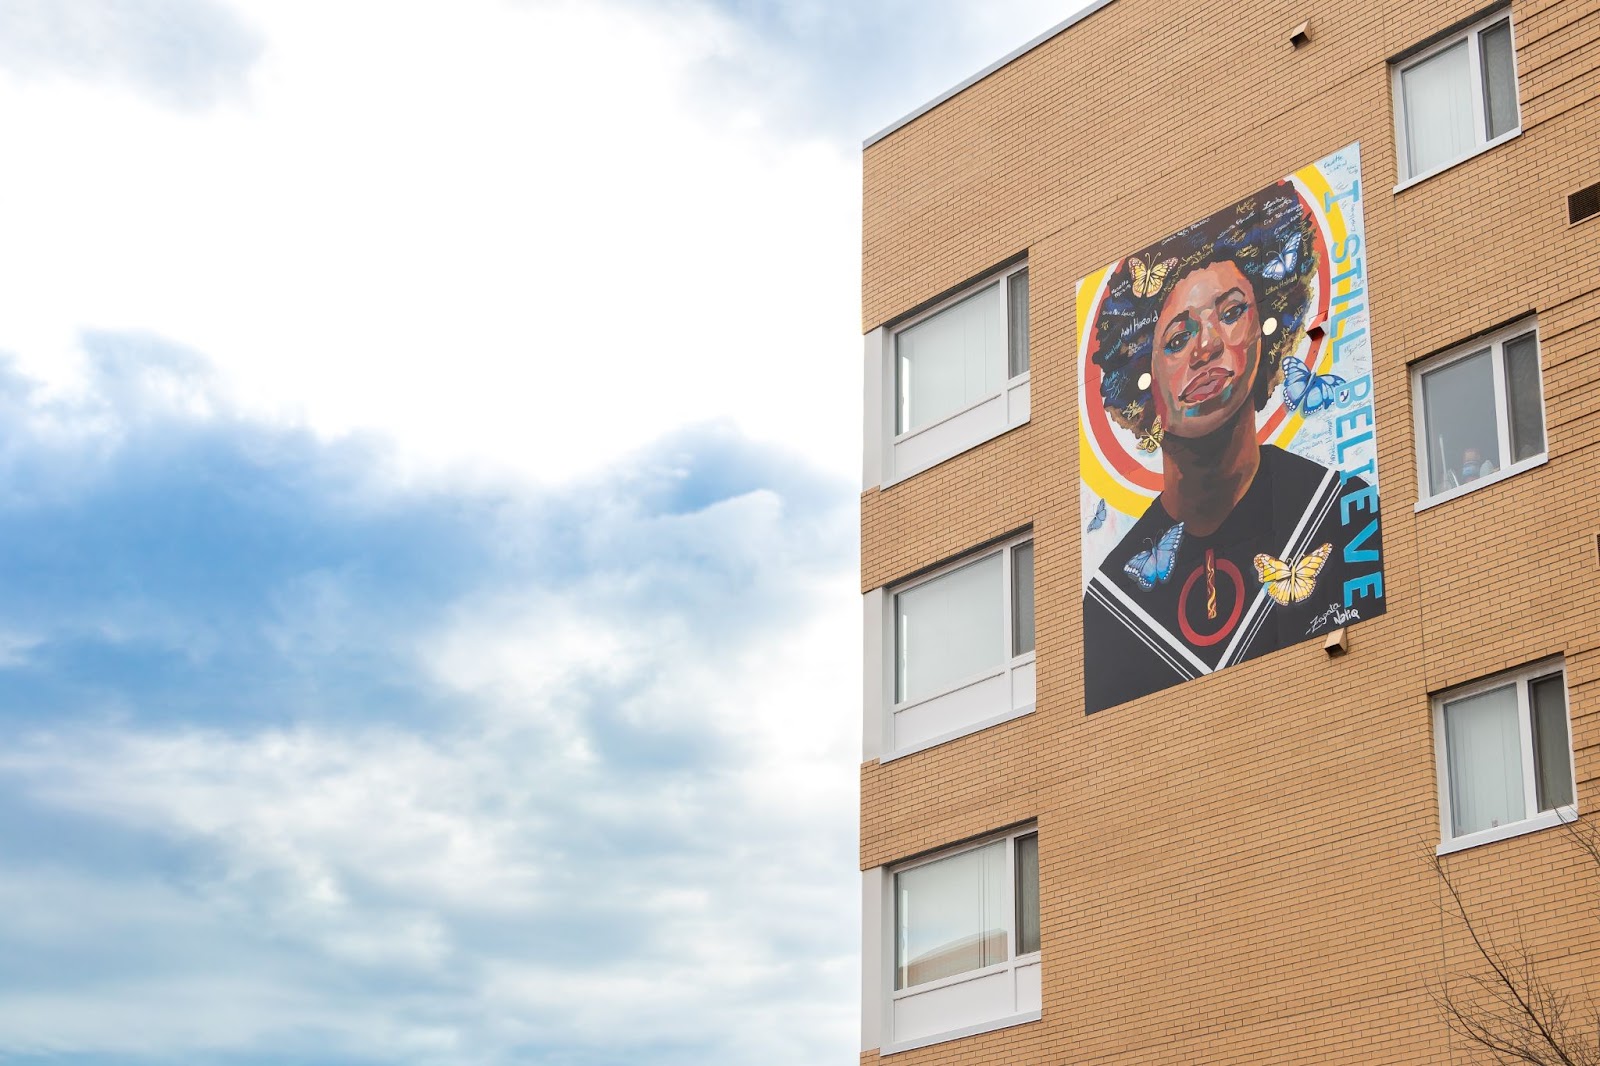  An apartment building surrounded by blue, slightly cloudy skies. On the building is a mural–a portrait of a black woman surrounded by a halo of light and butterflies, with the text I STILL BELIEVE running along the side of the mural.